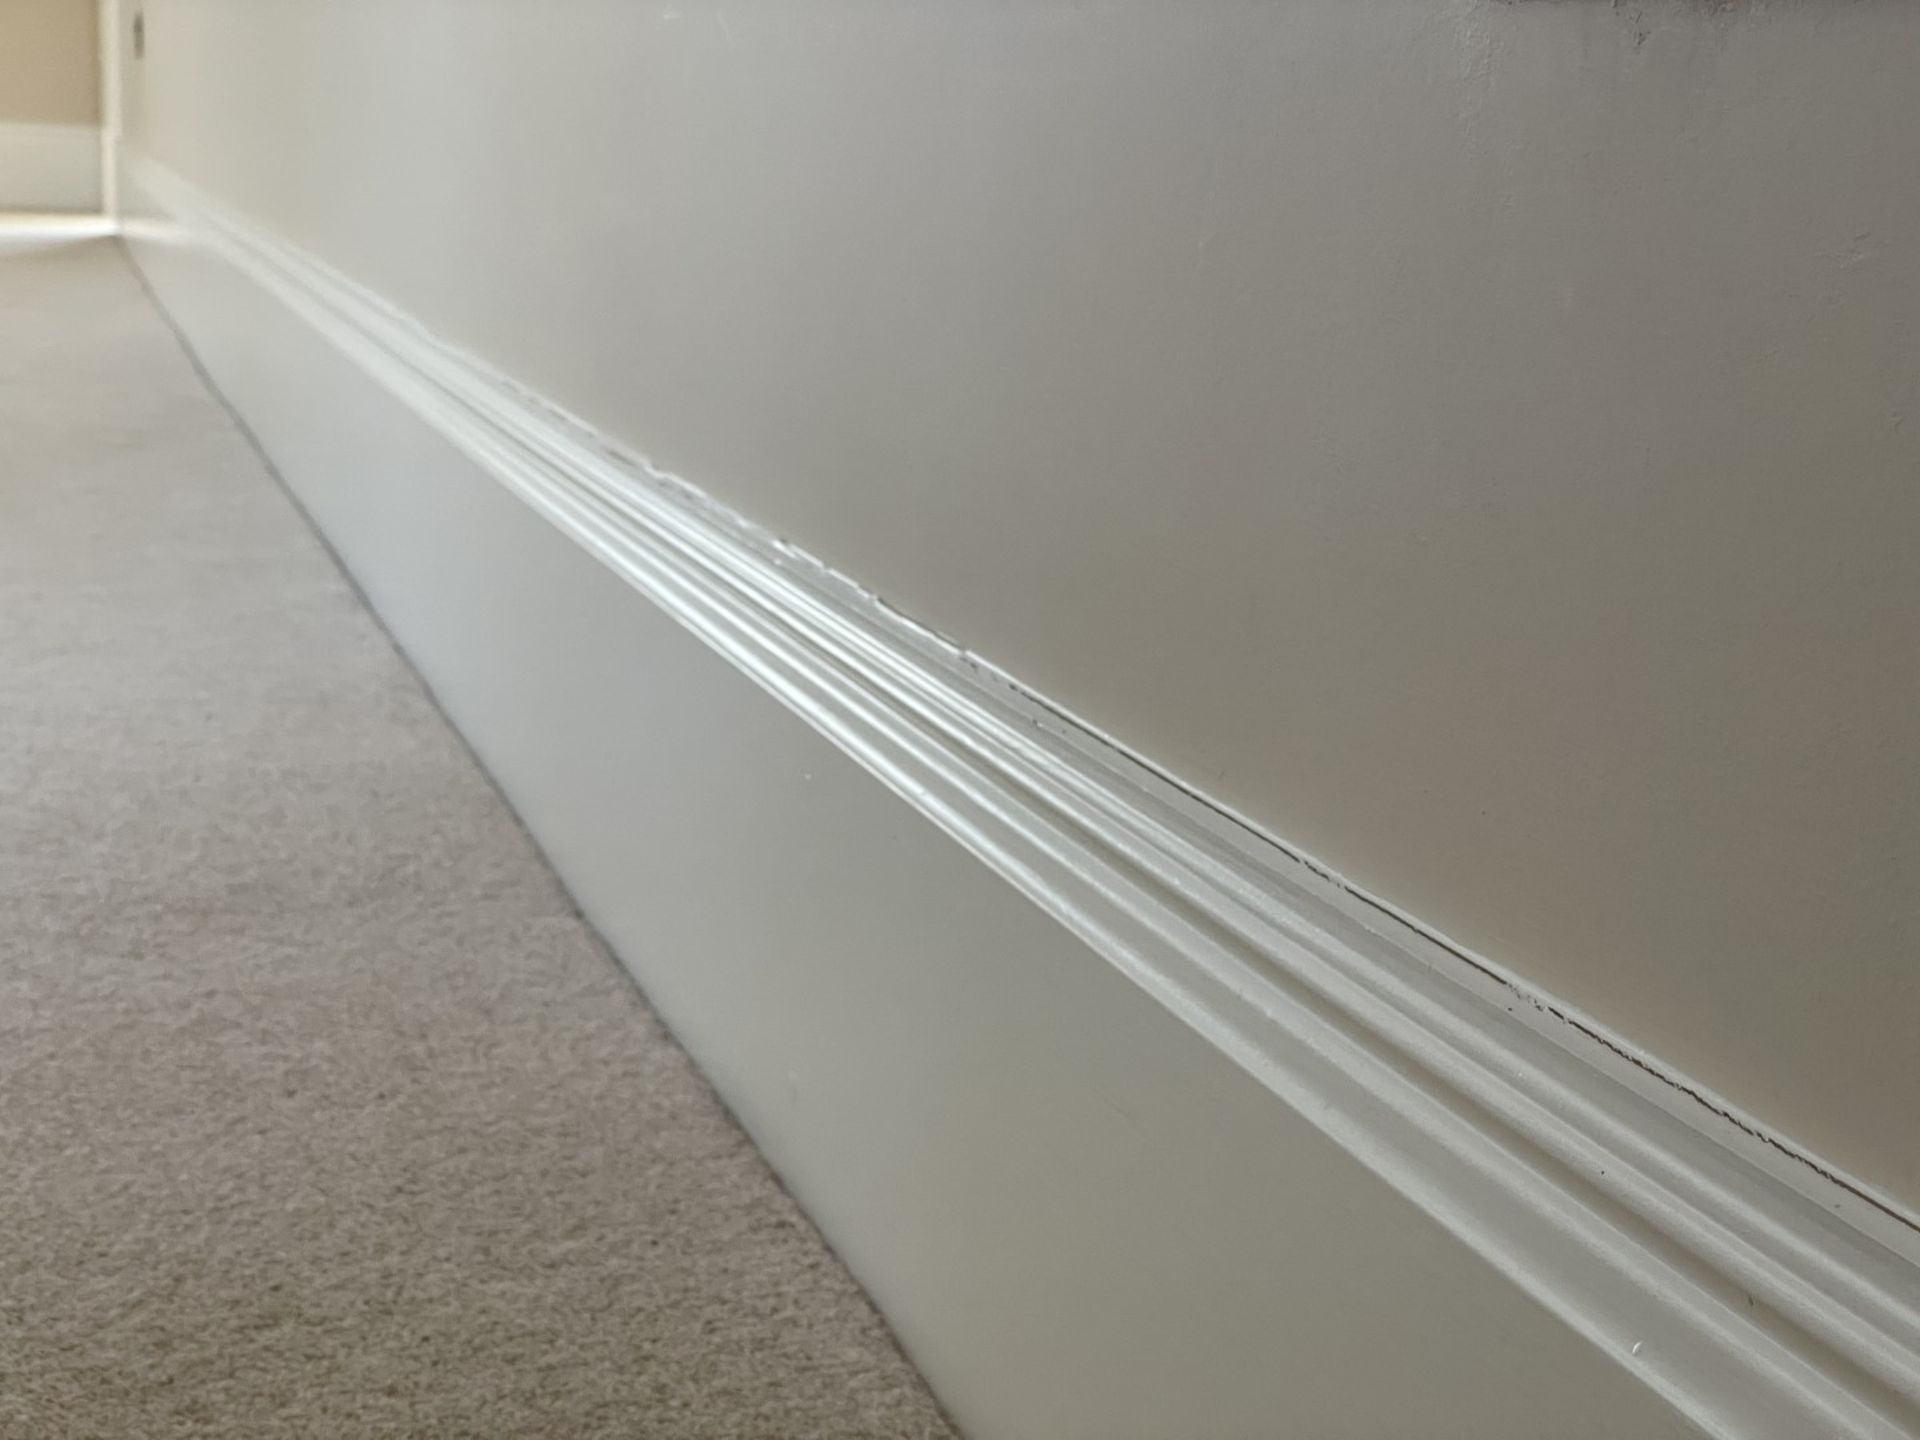 Approximately 20-Metres of Painted Timber Wooden Skirting Boards, In White - Ref: PAN219 - CL896 - - Image 7 of 8